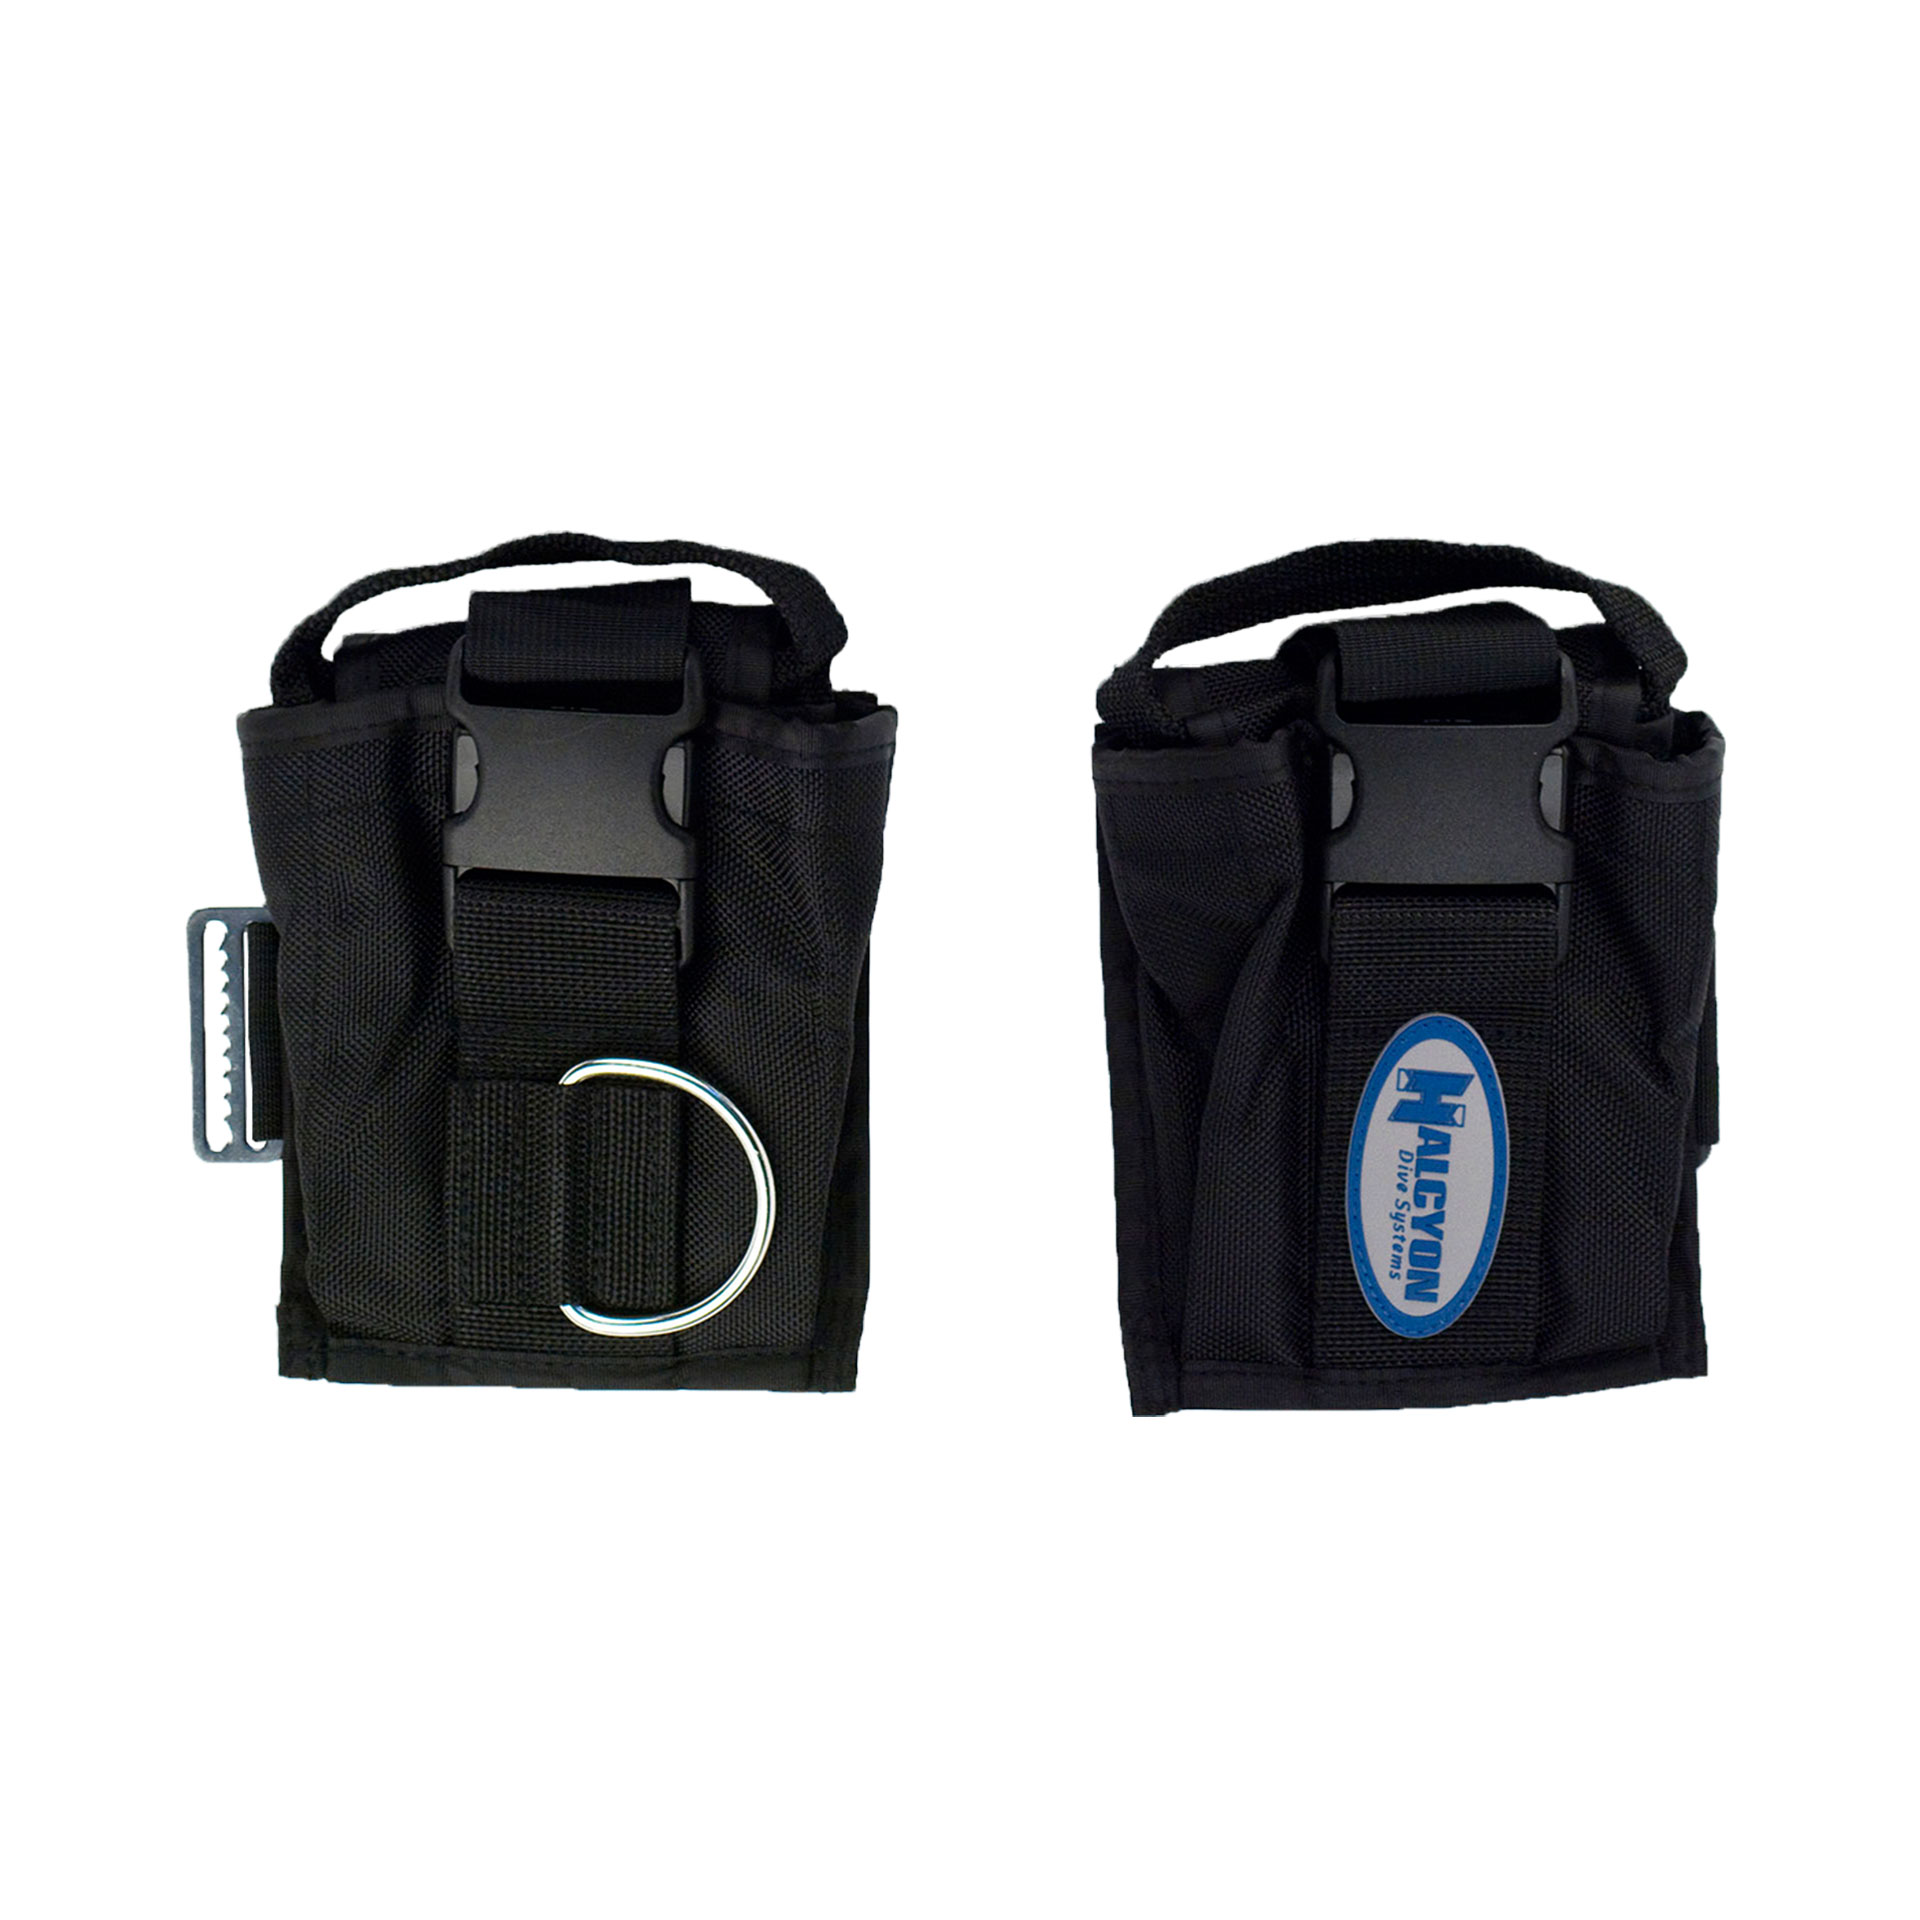 Halcyon Infinity BCD System with ACB Pockets